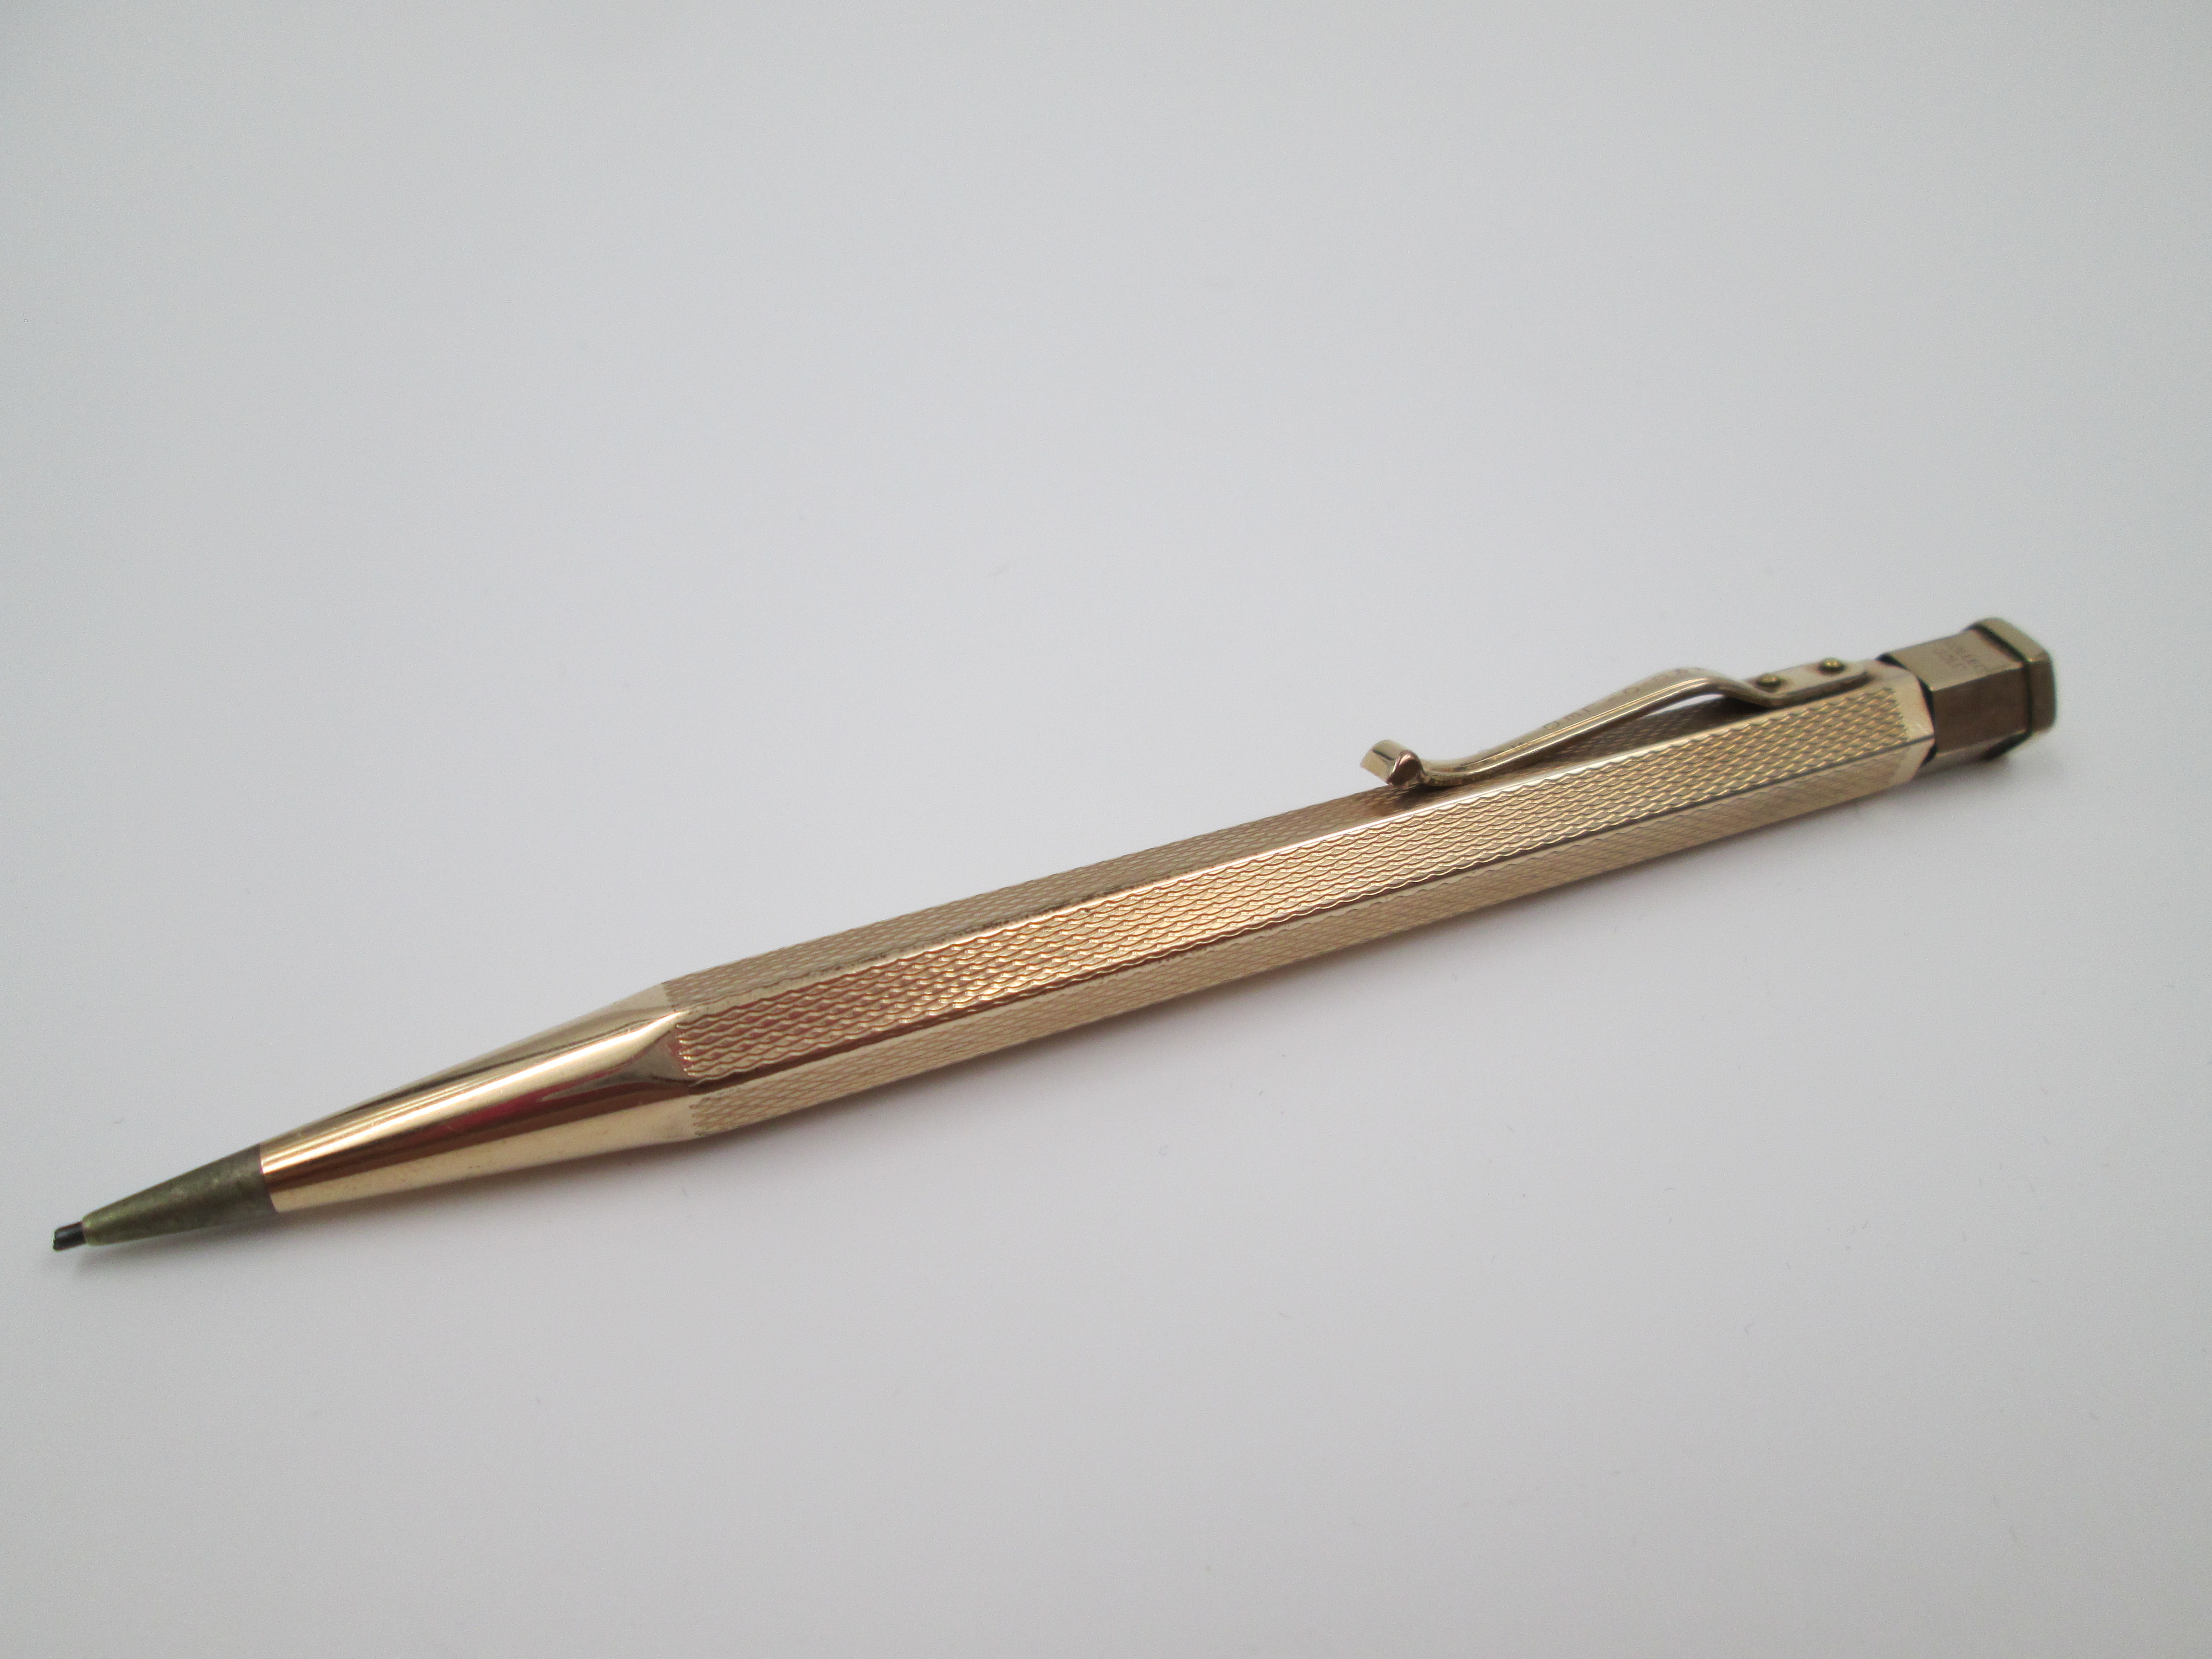 yard-o-led propelling pencil rolled gold 1930 england.